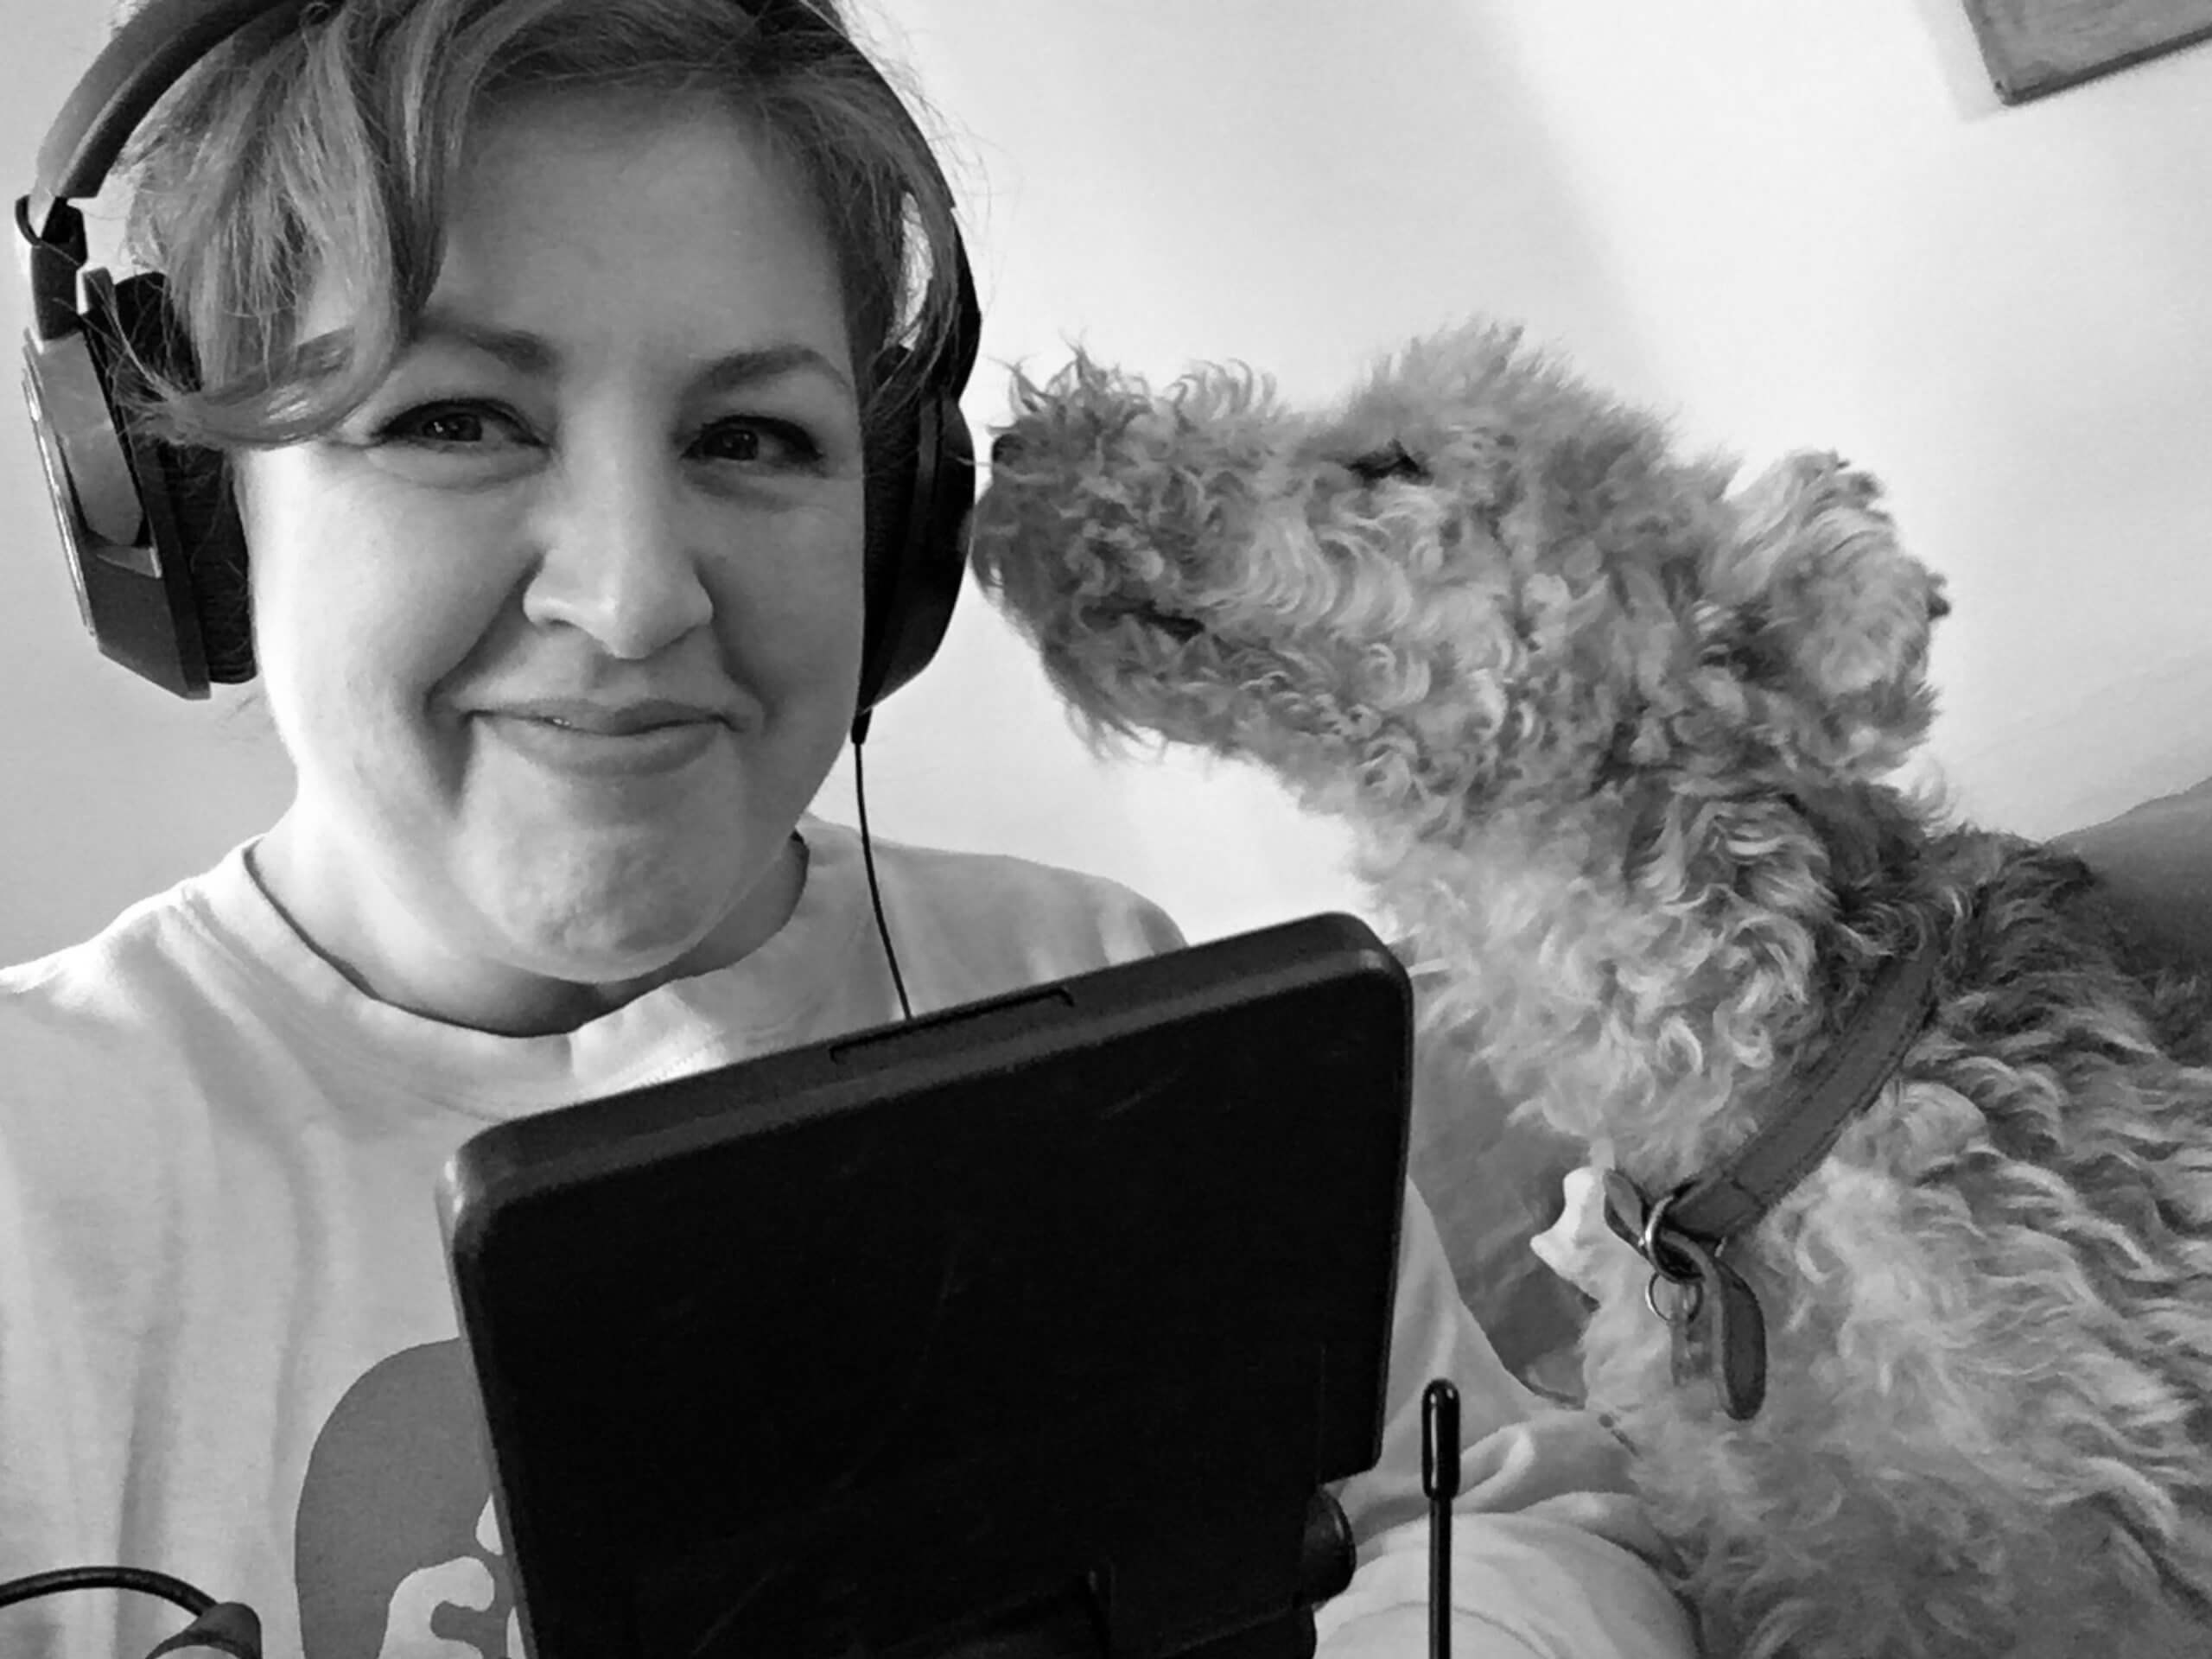 Production still of Jeanie Finlay looking directly at the camera and smiling. She is wearing headphones and holding a camera. To her right is a fox terrier dog, Dandy from the film Seahorse, who is sniffing her ear.